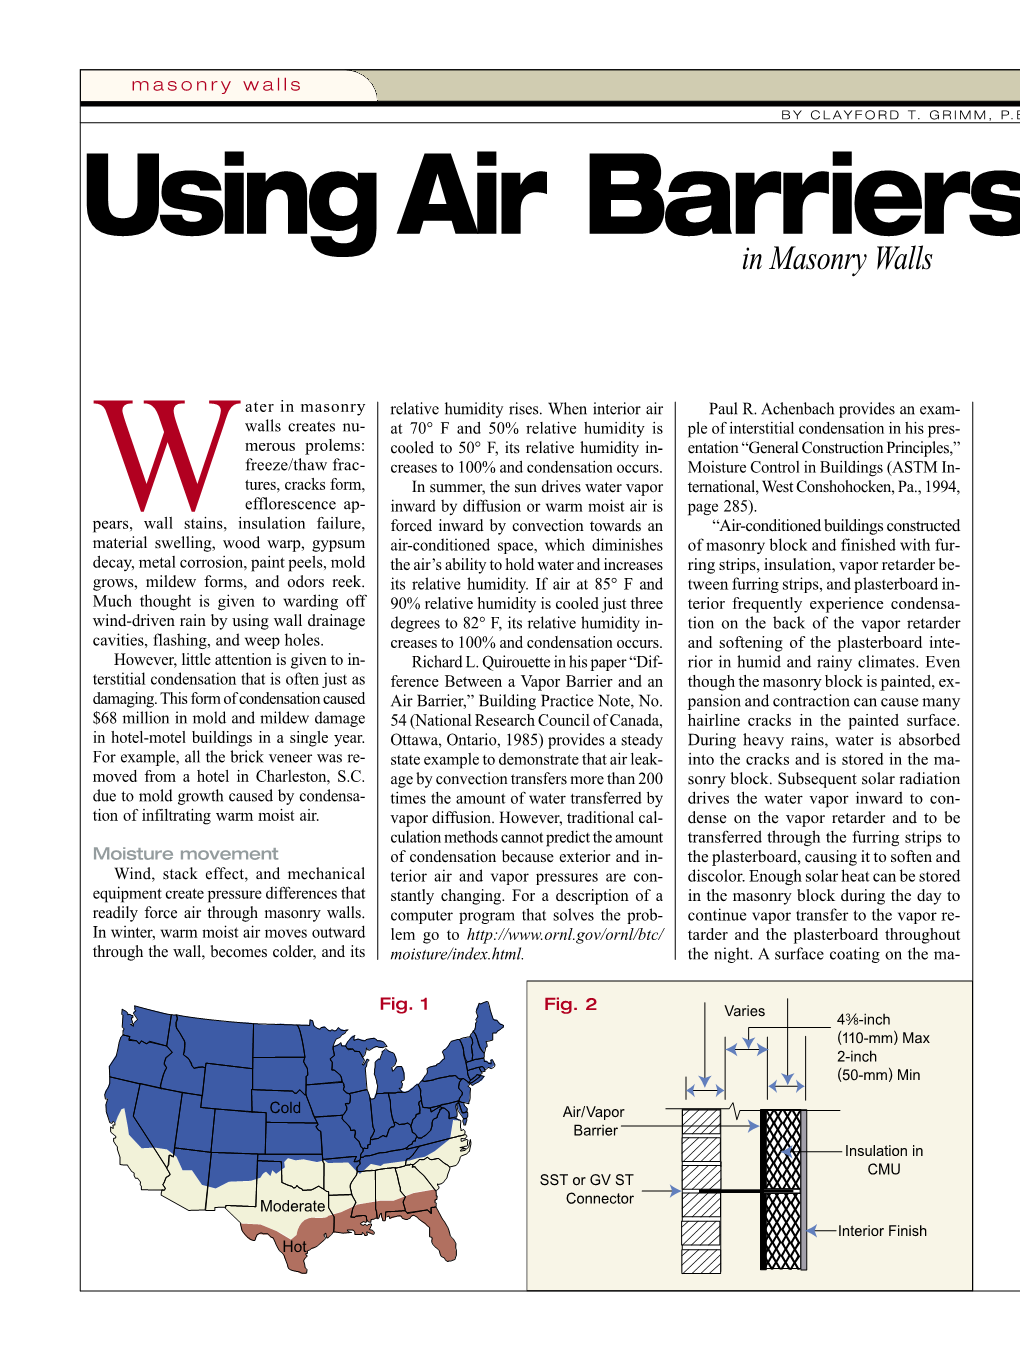 Using Air Barriers in Masonry Walls